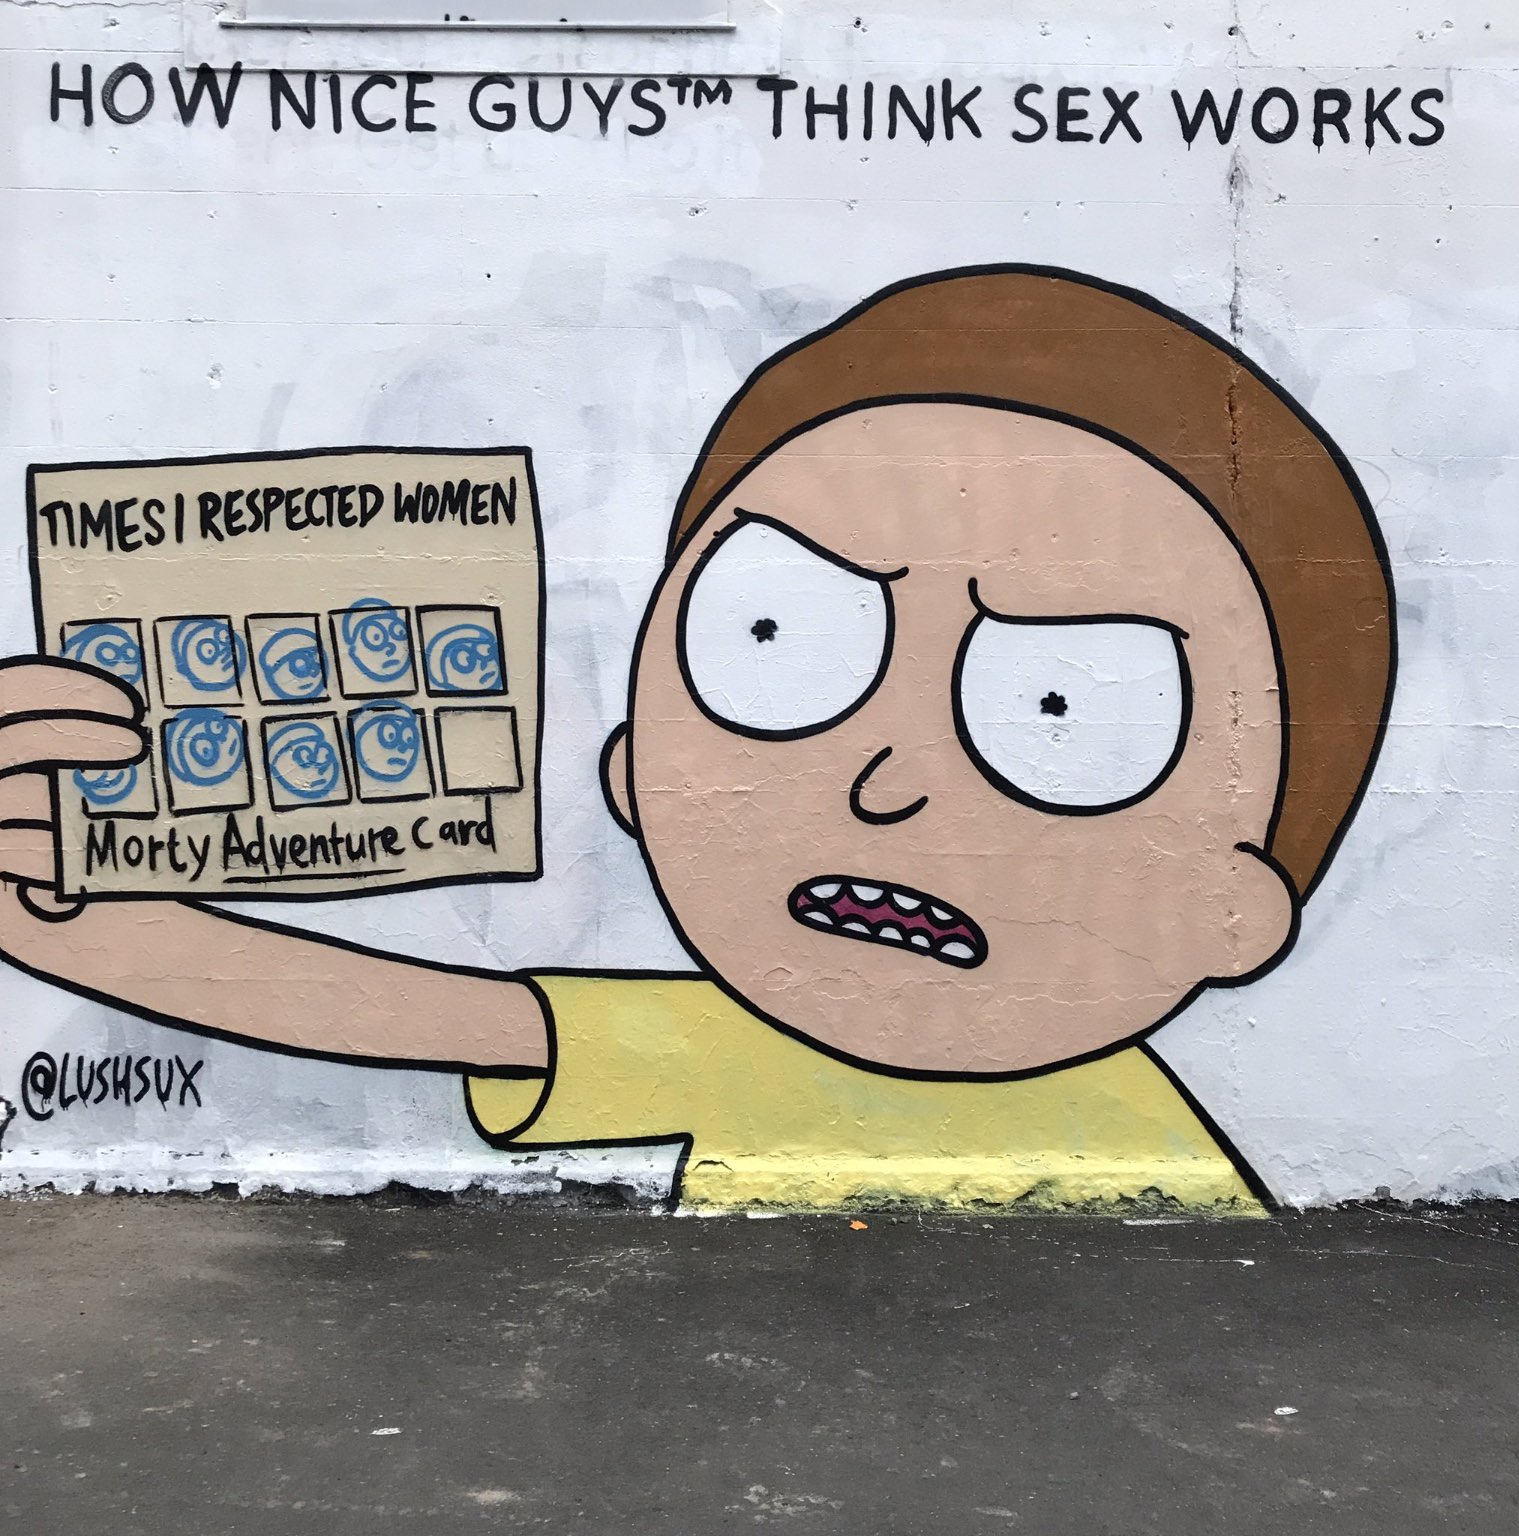 rick and morty nice guys - How Nice Guys Think Sex Works Nmesi Respected Women Rooq Morty Adventure Card